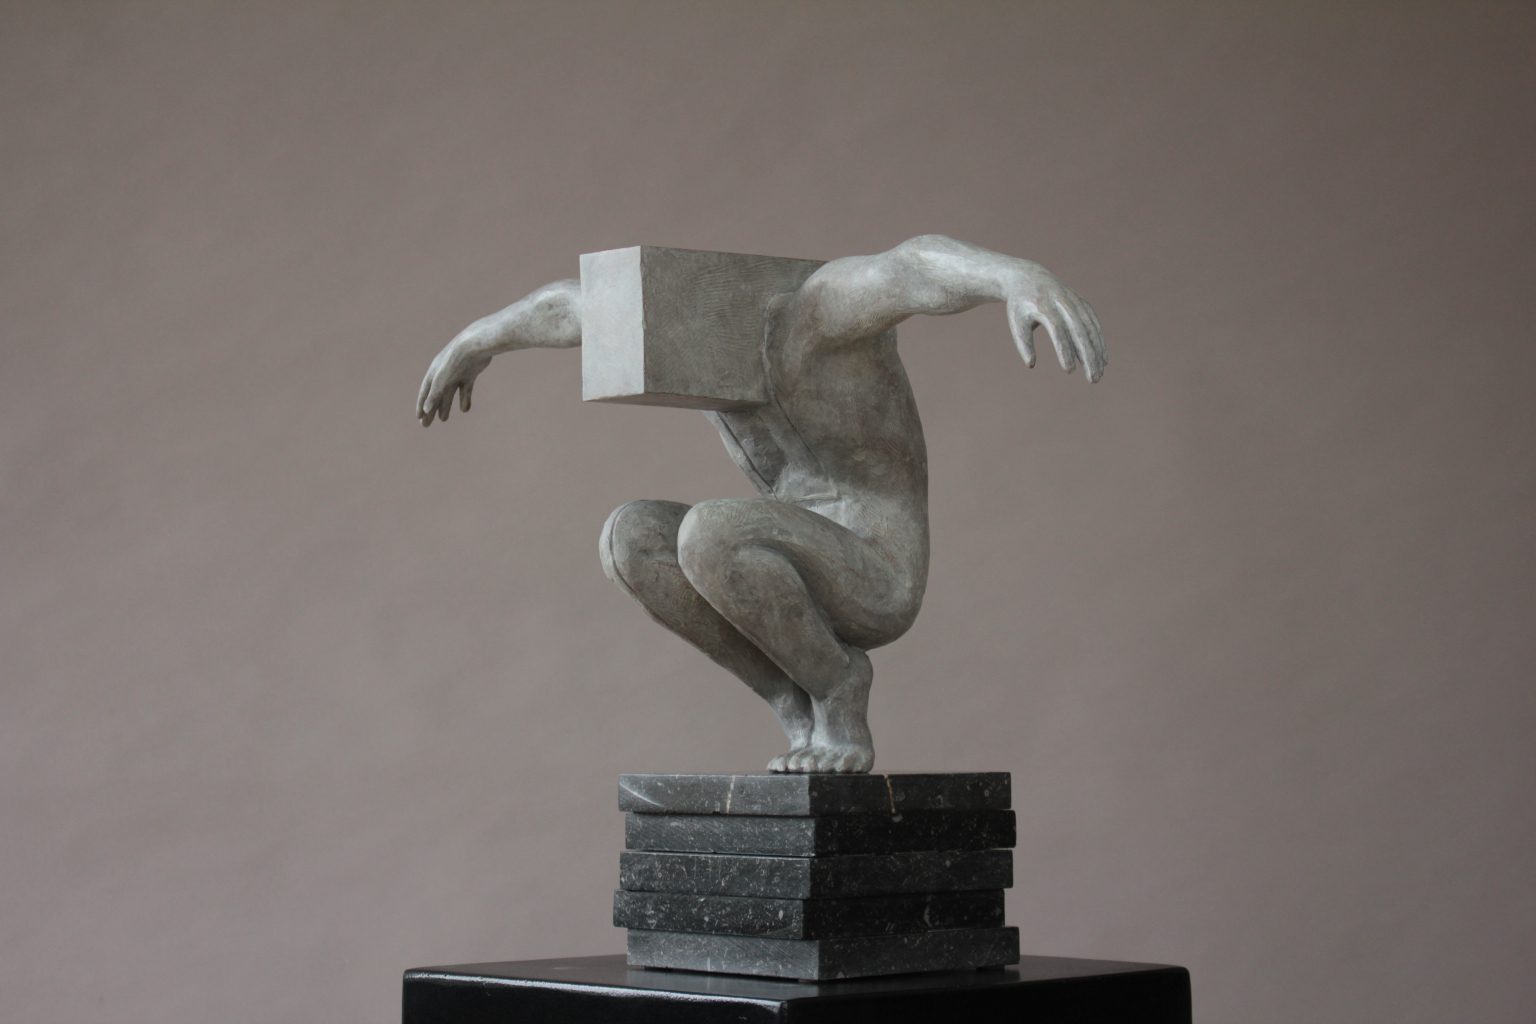 Where Flesh Meets Geometry in the Sculptures of Rogério Timóteo